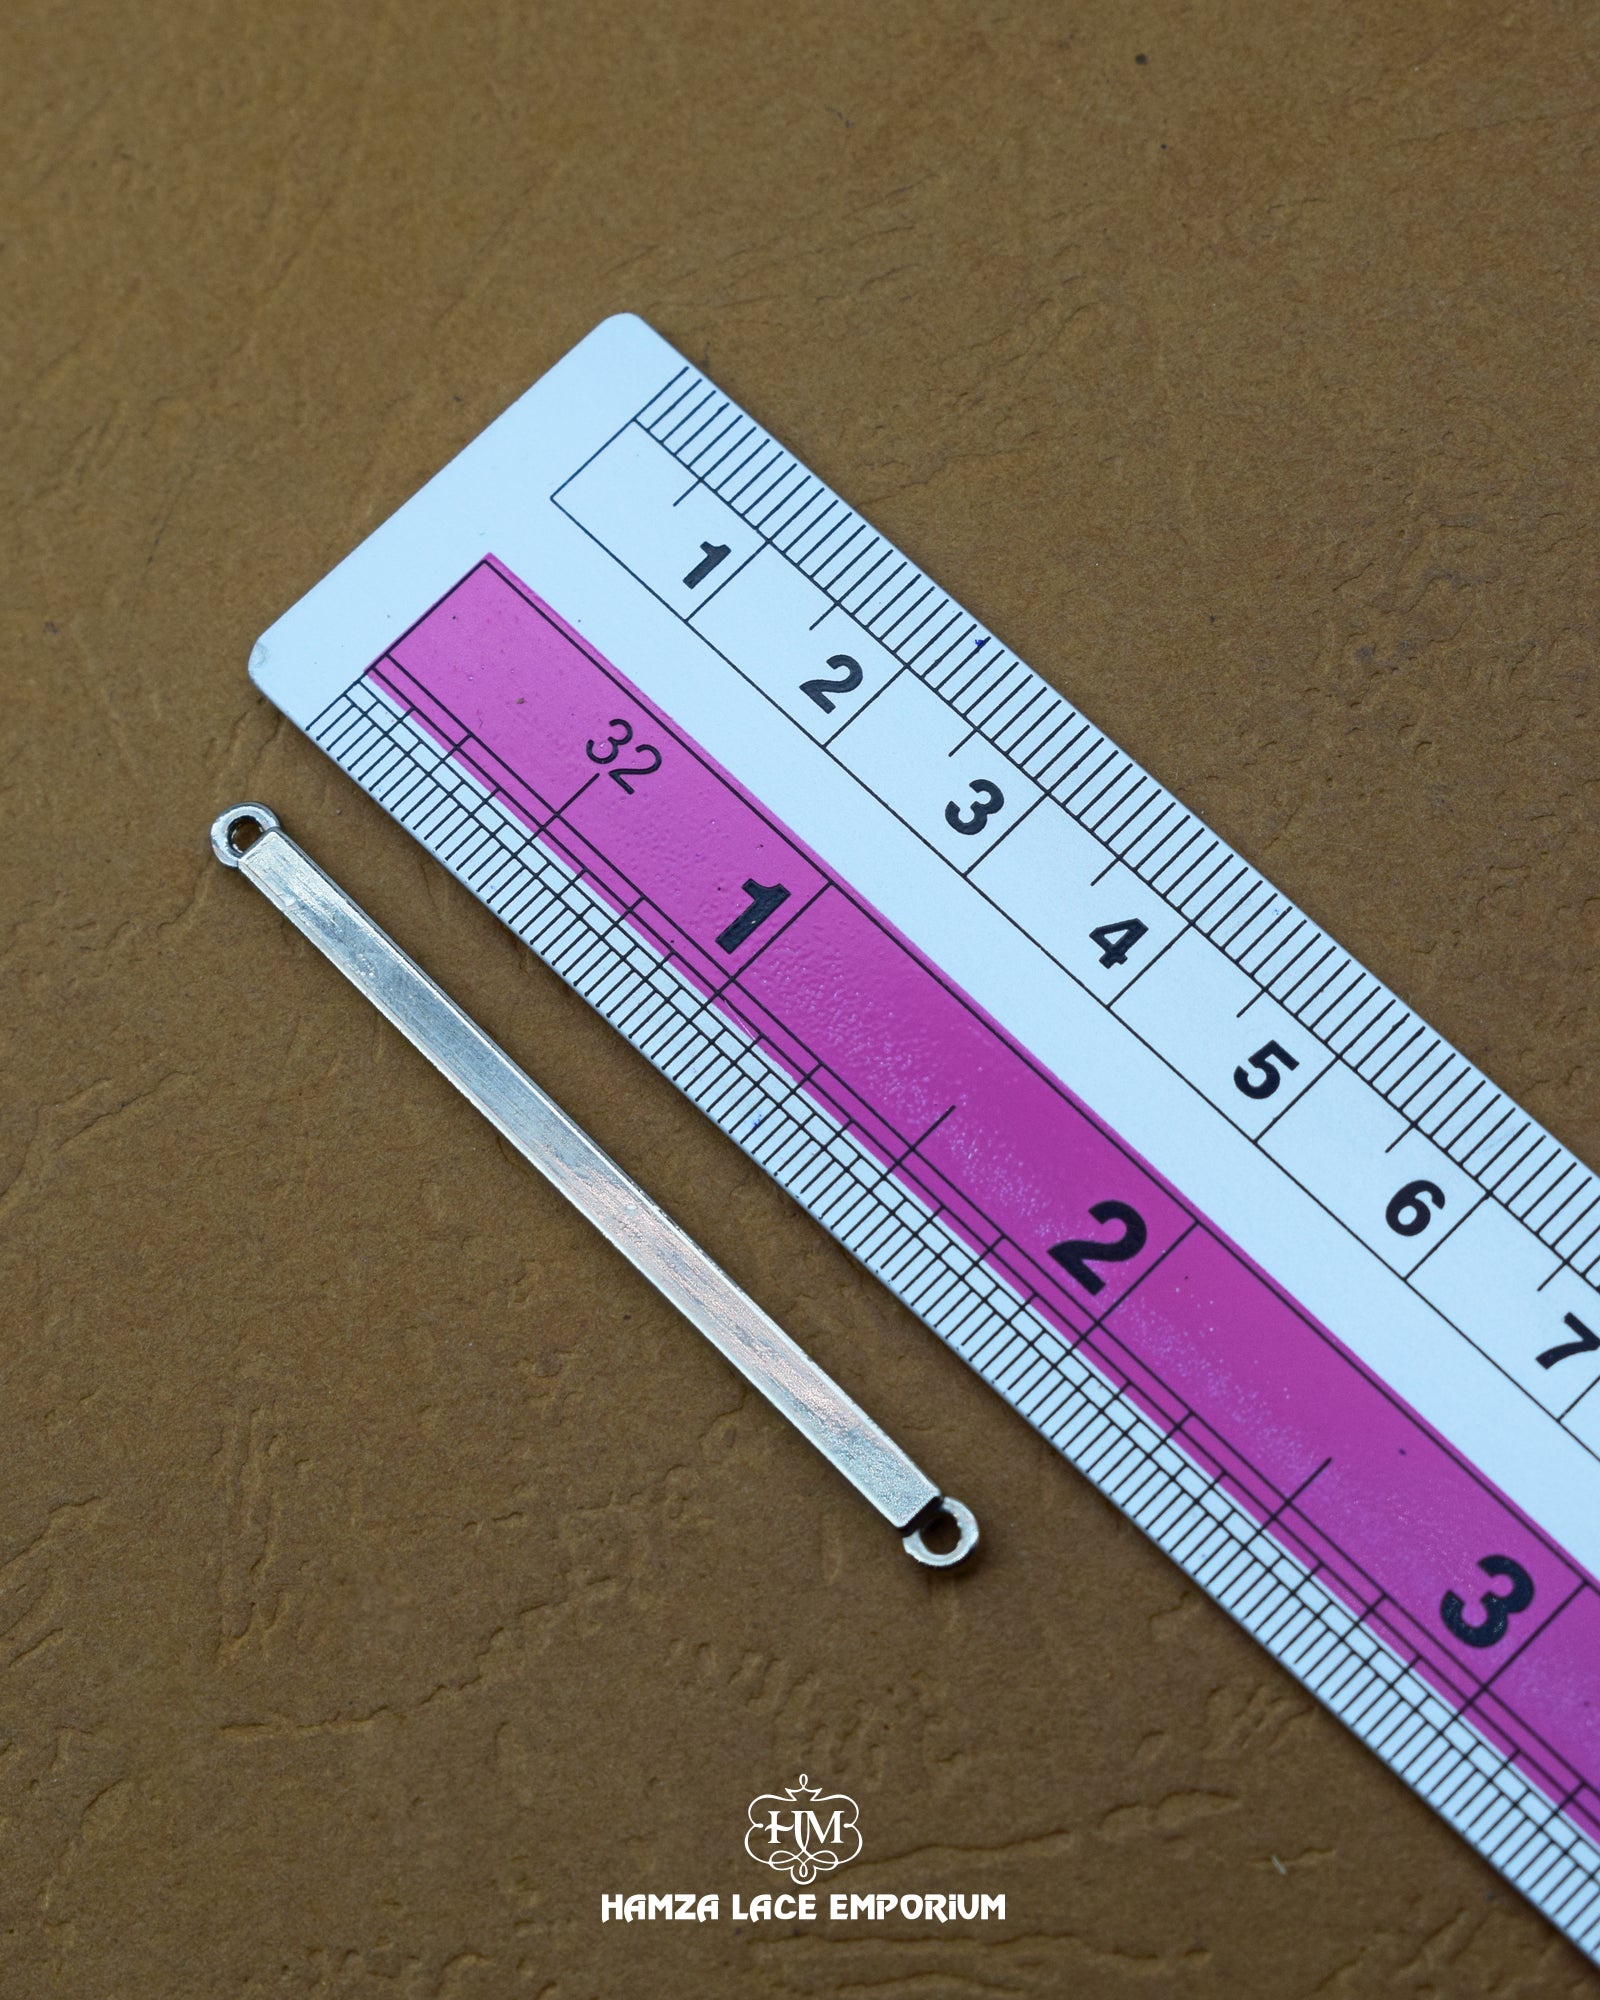 The dimensions of the 'Metal Hanging MB702' are determined using a ruler.